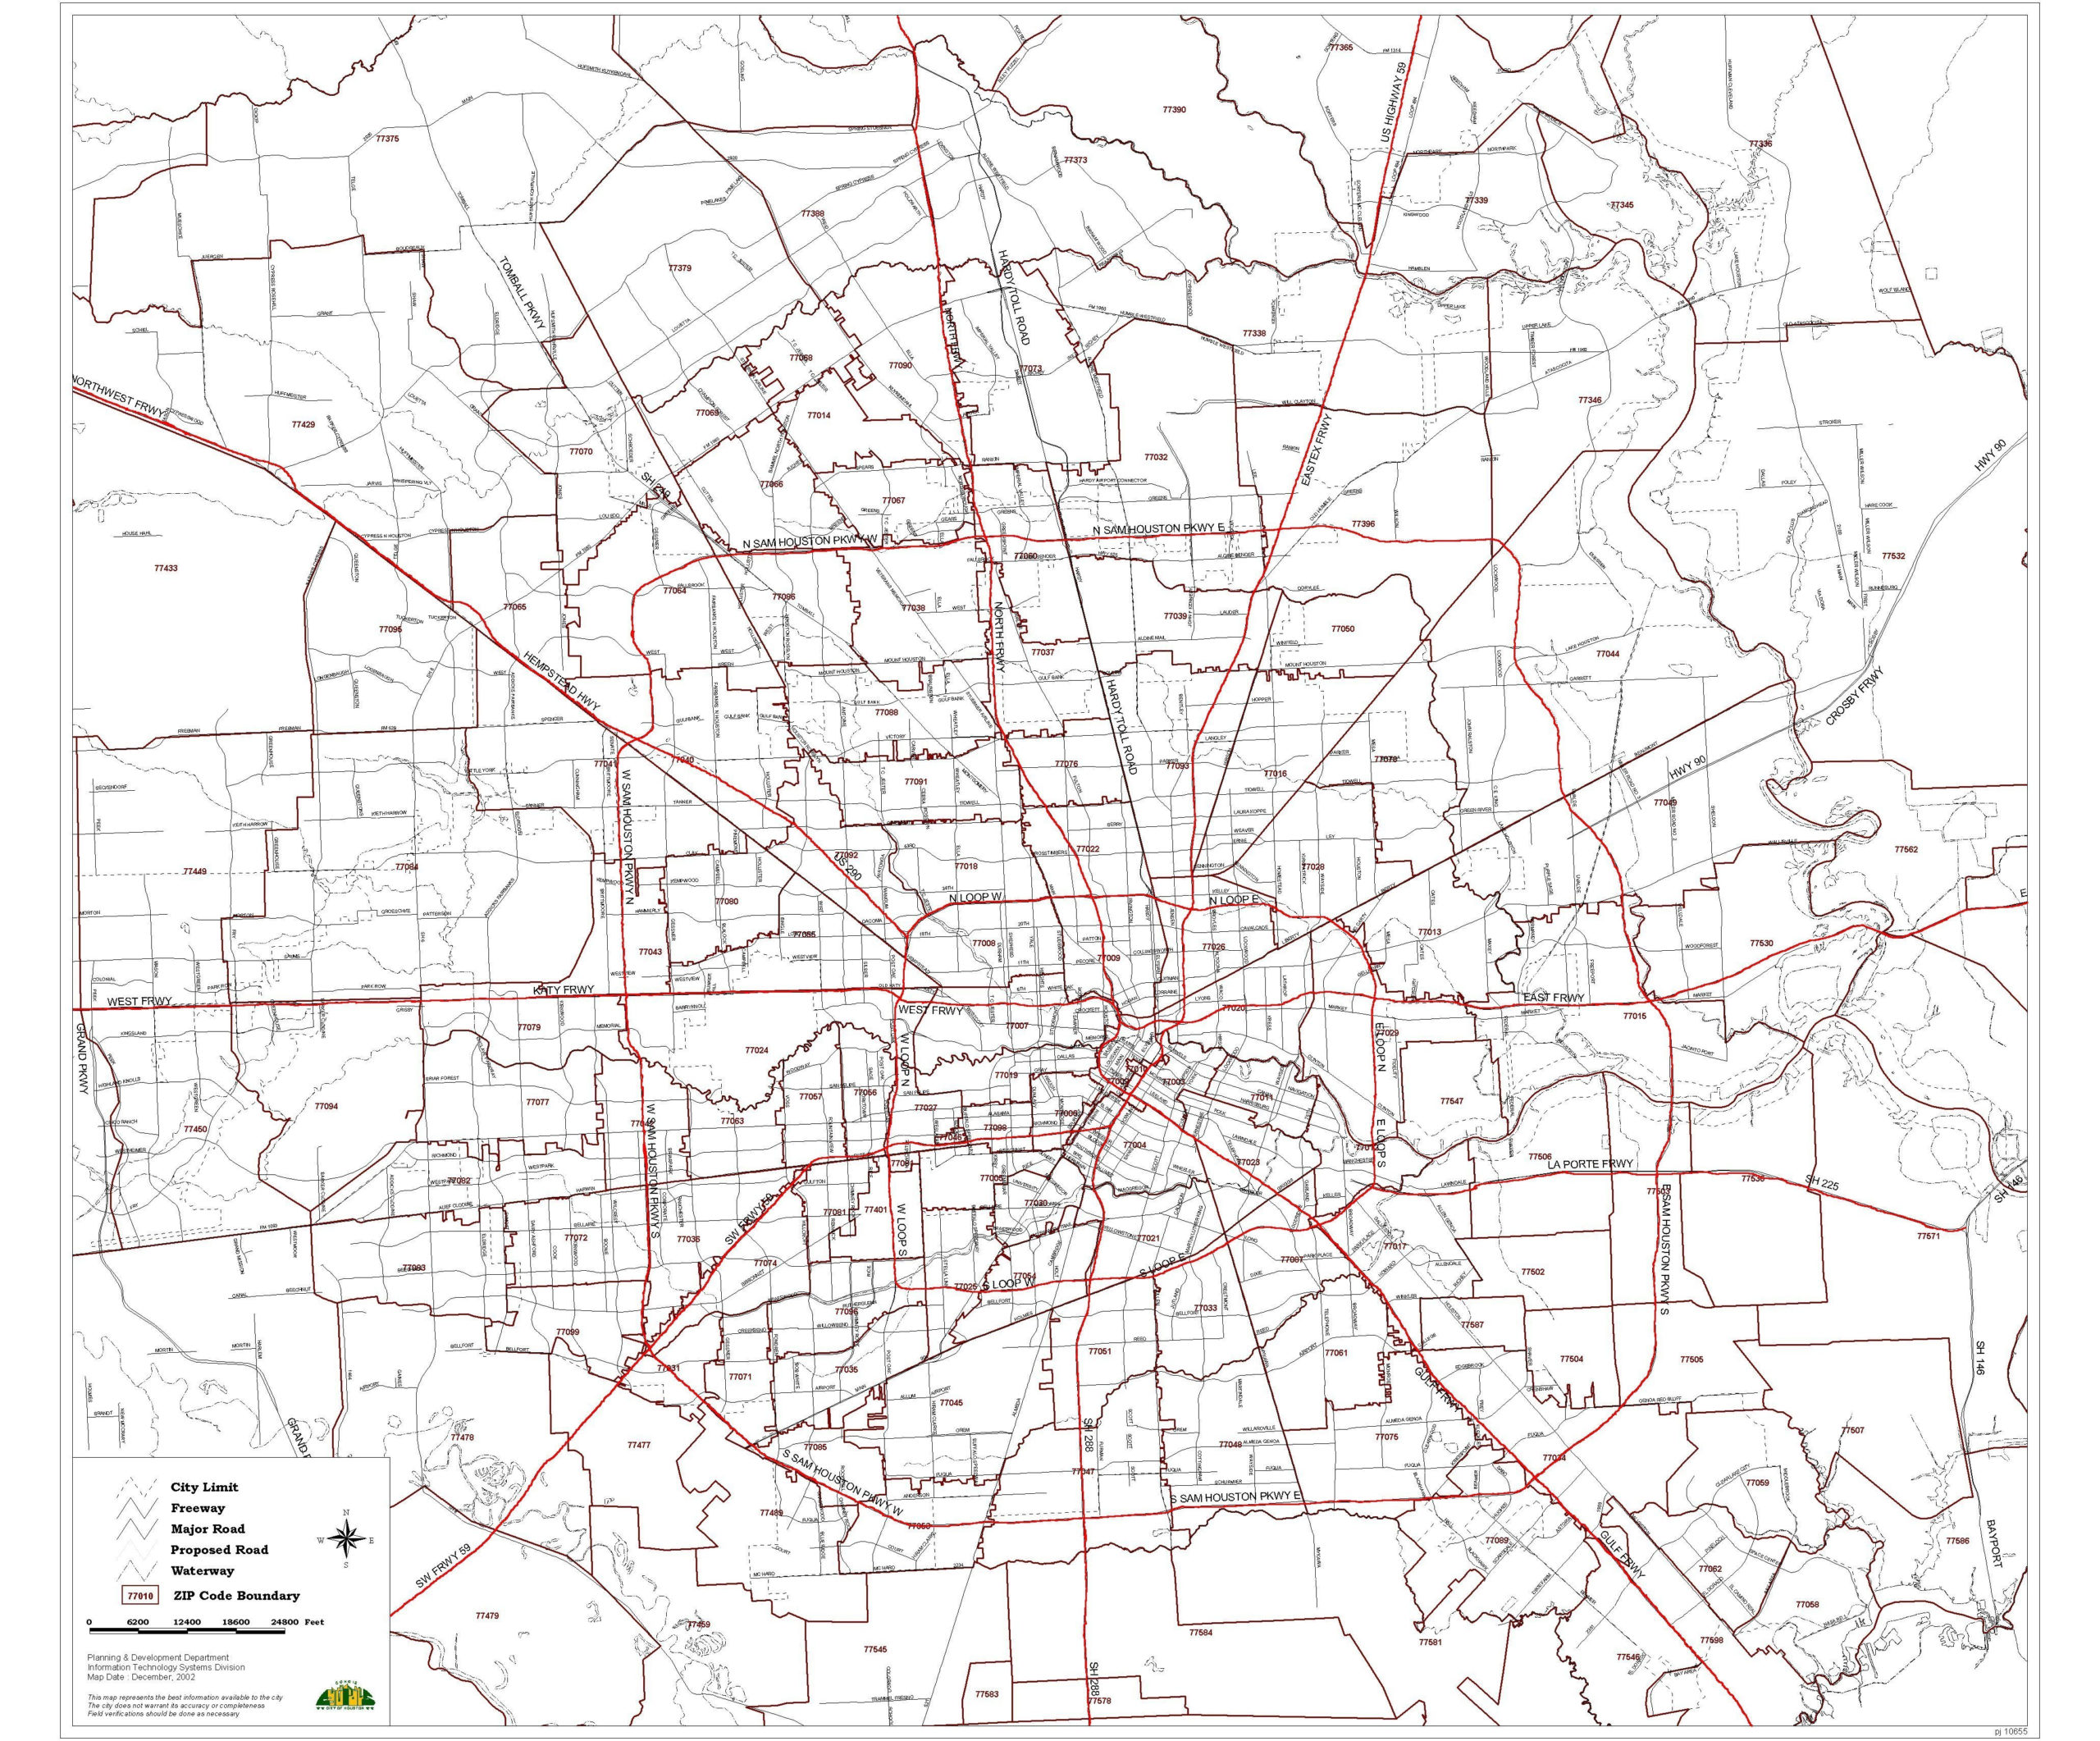 Houston Zip Codes List And Map